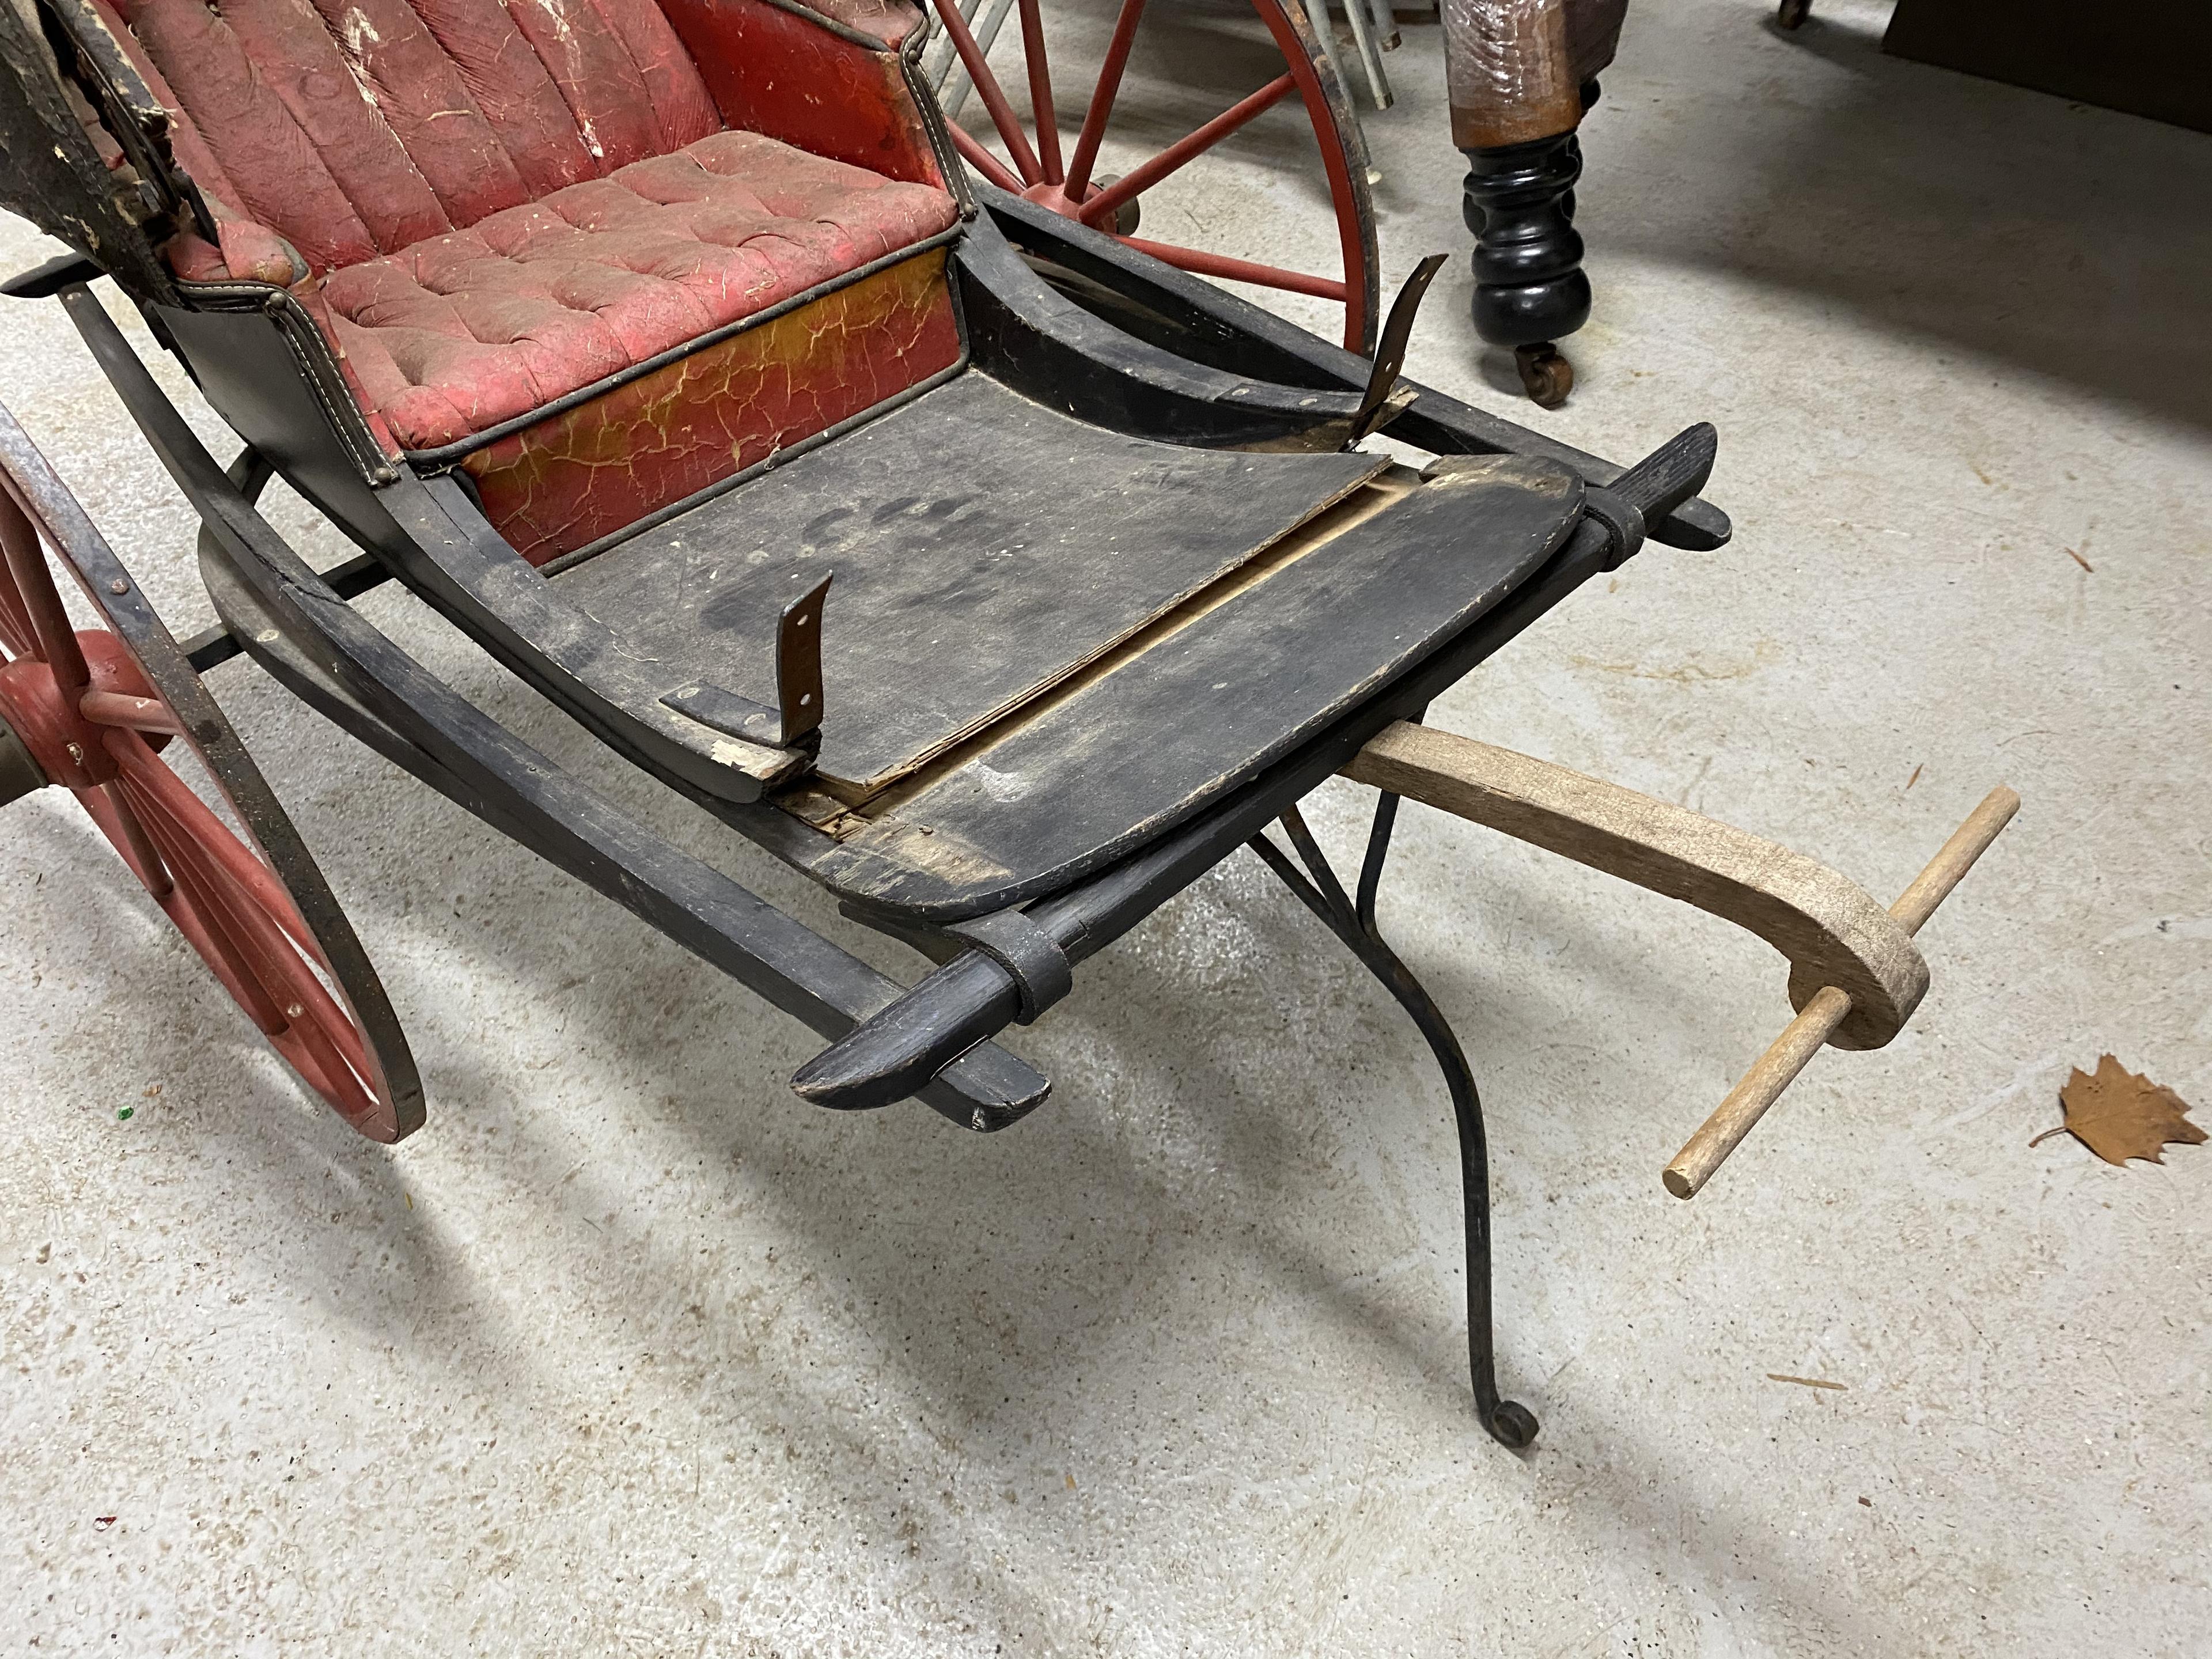 Unusual Antique Goat or Pony Drawer baby Carriage or Wagon